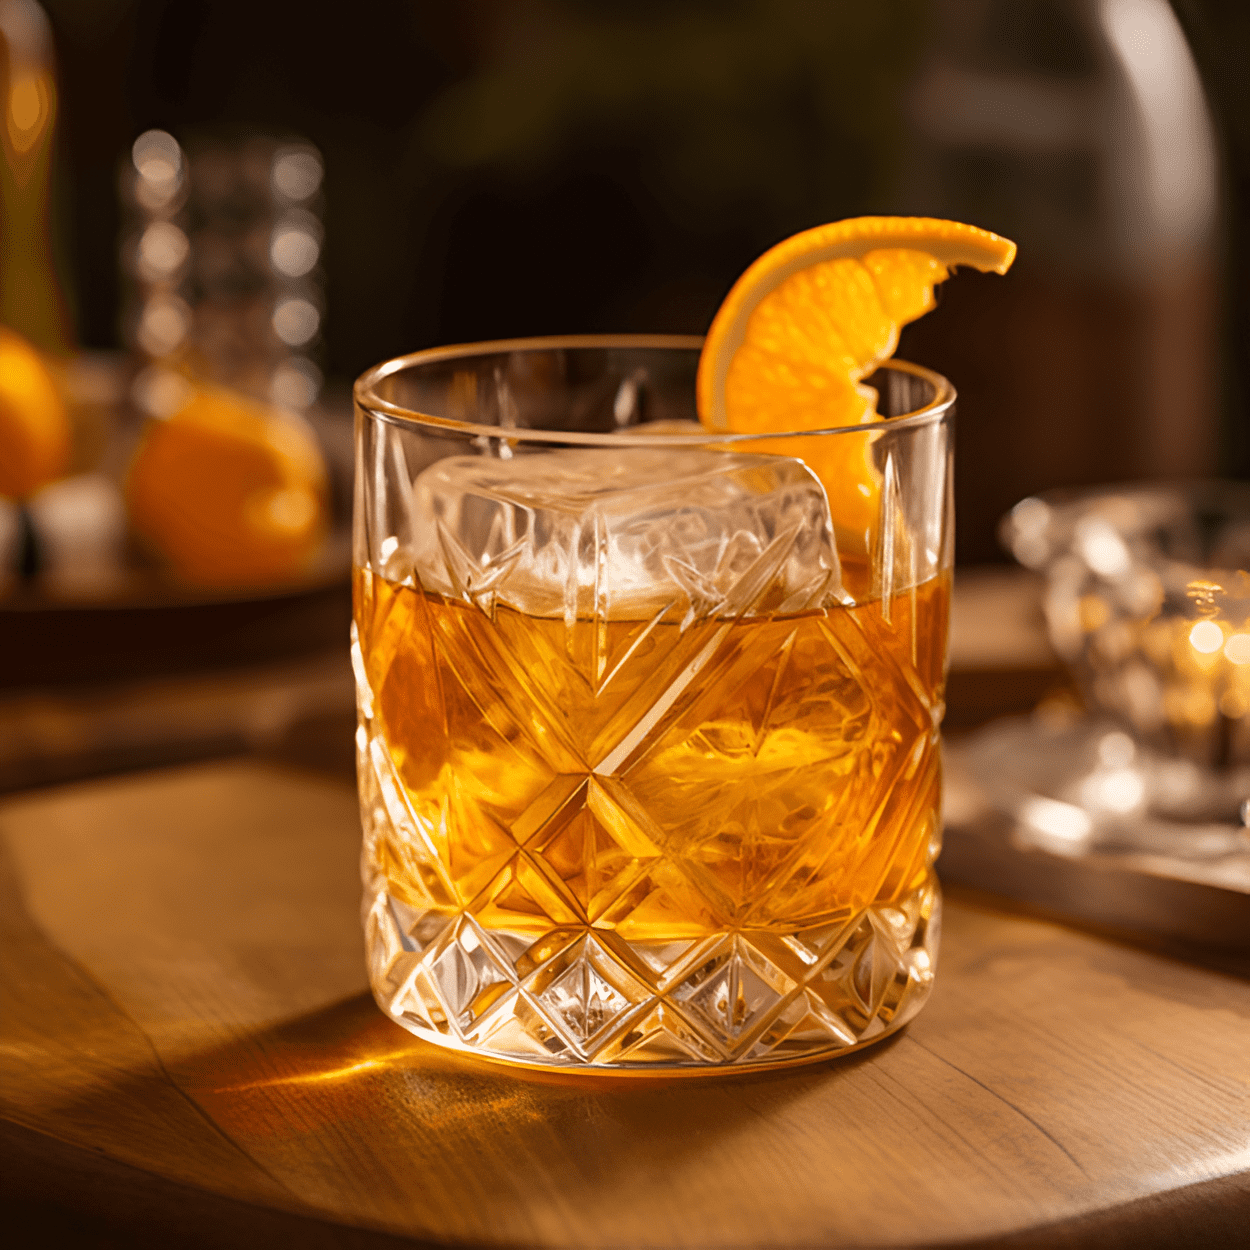 Bob's Old Fashioned Cocktail Recipe - Bob's Old Fashioned is a harmonious blend of strong, sweet, and slightly bitter flavors. The whiskey provides a robust, smoky base, while the maple syrup adds a rich, sweet undertone. The bitters give it a subtle, complex edge, making it a well-rounded, satisfying cocktail.